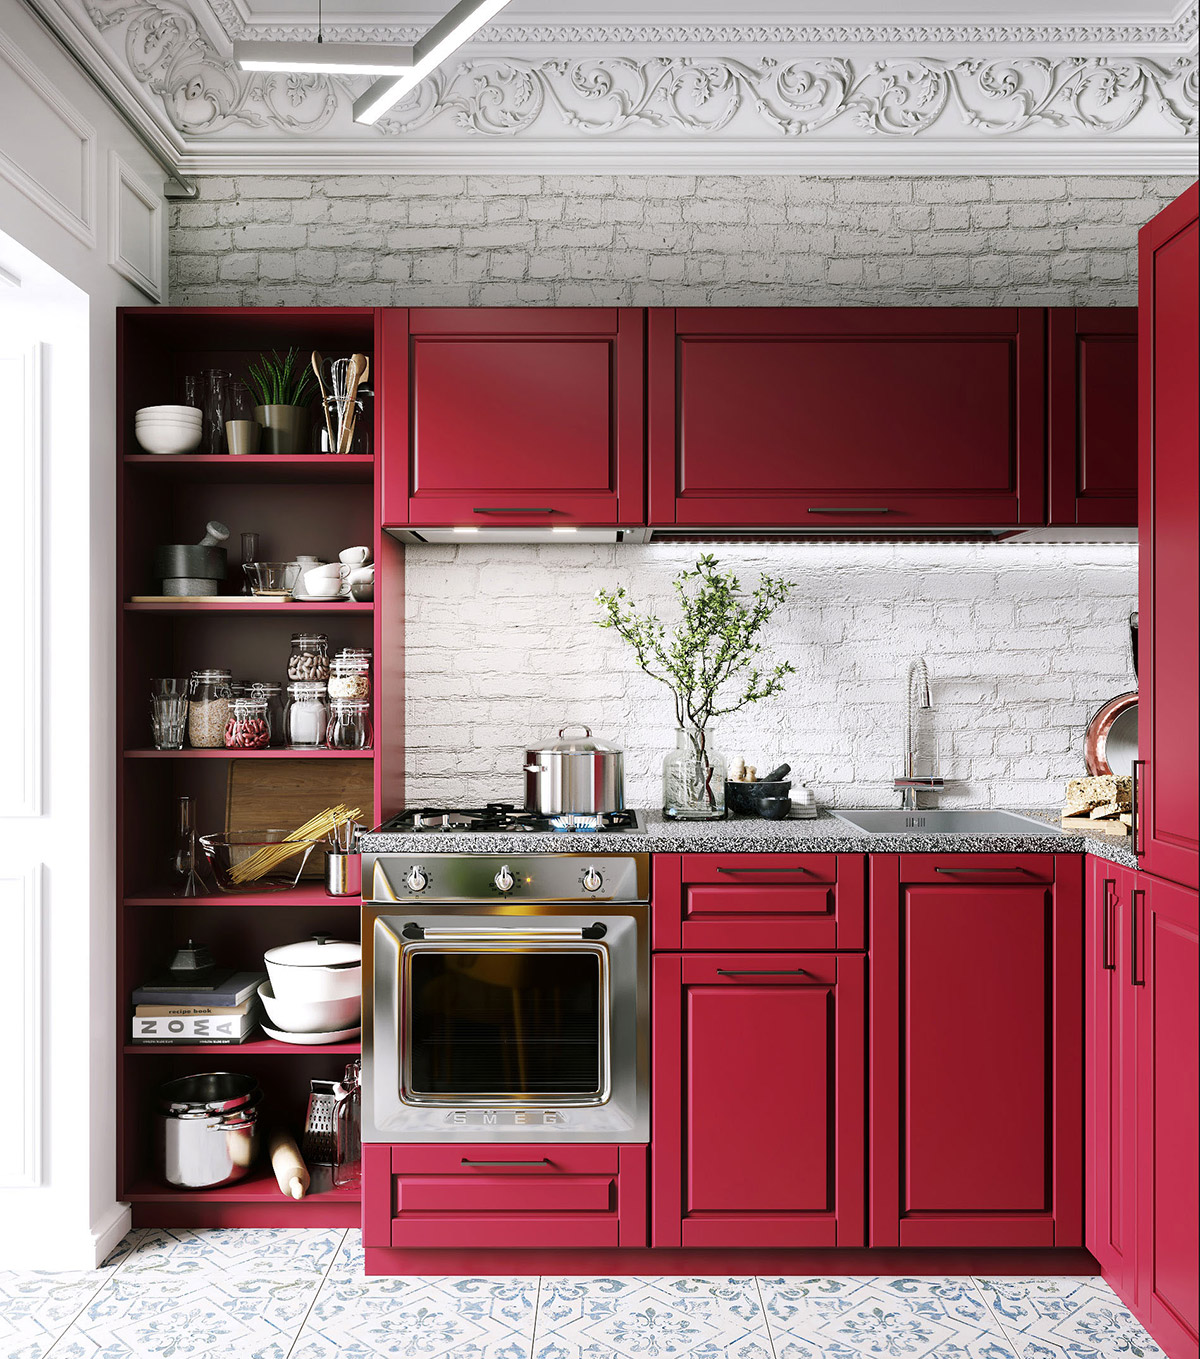 https://www.home-designing.com/wp-content/uploads/2021/01/red-neoclassical-kitchen.jpg